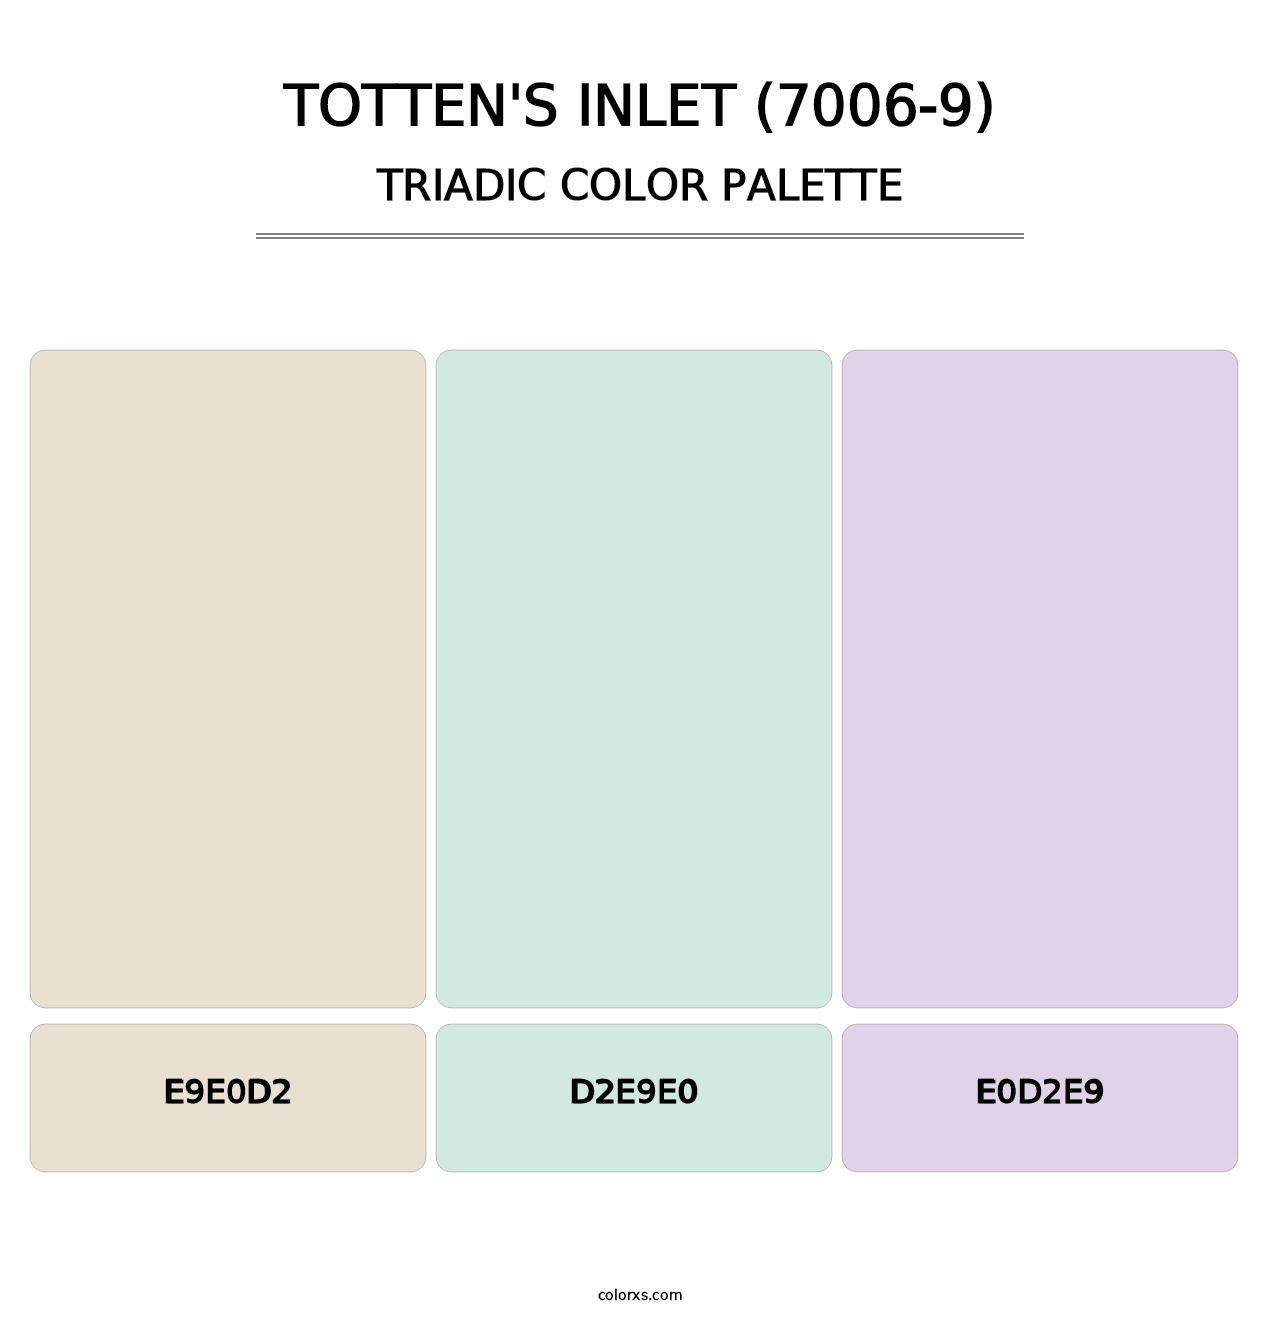 Totten's Inlet (7006-9) - Triadic Color Palette